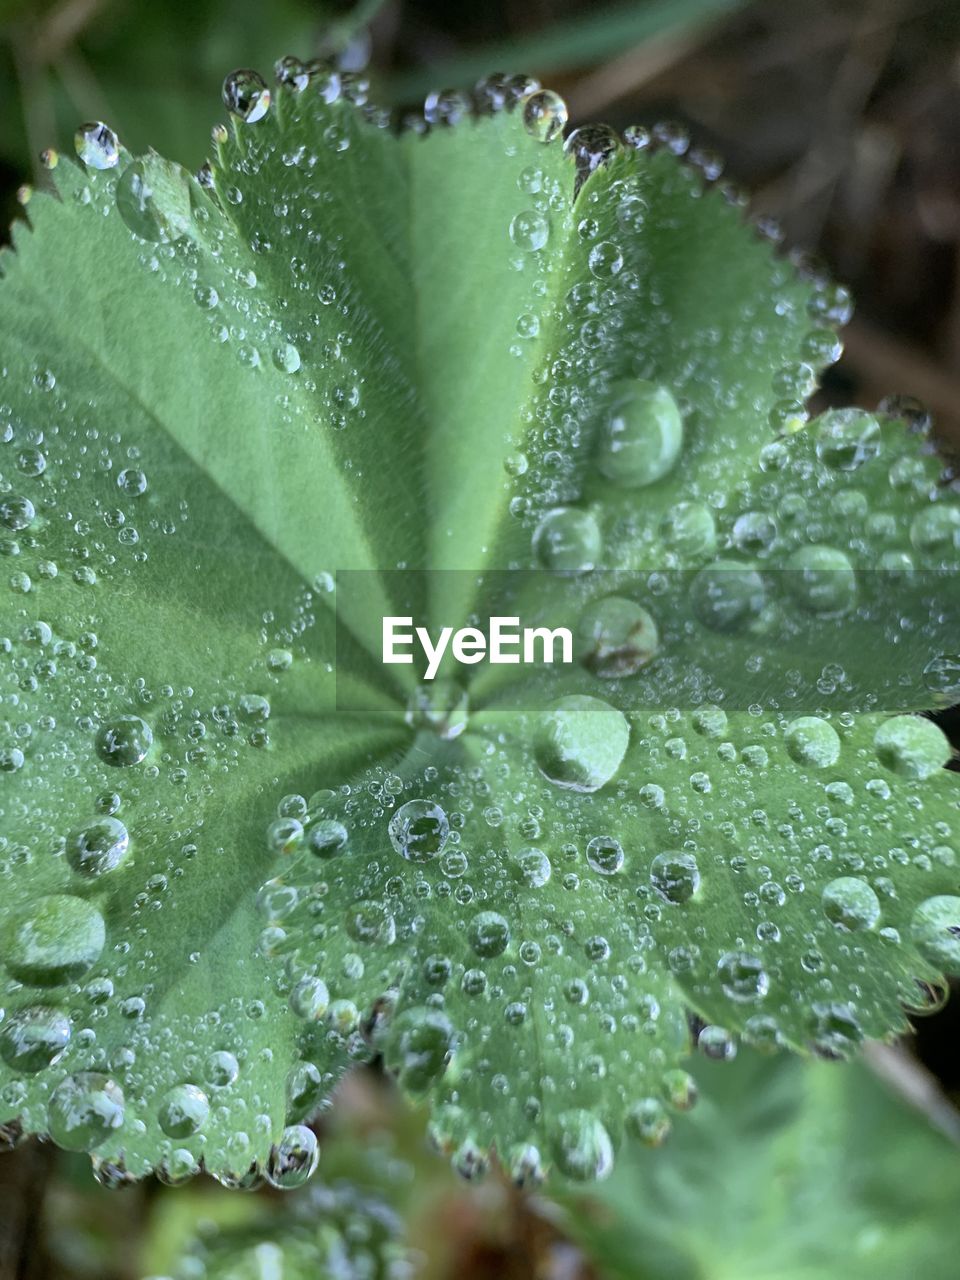 CLOSE-UP OF RAINDROPS ON PLANT LEAVES